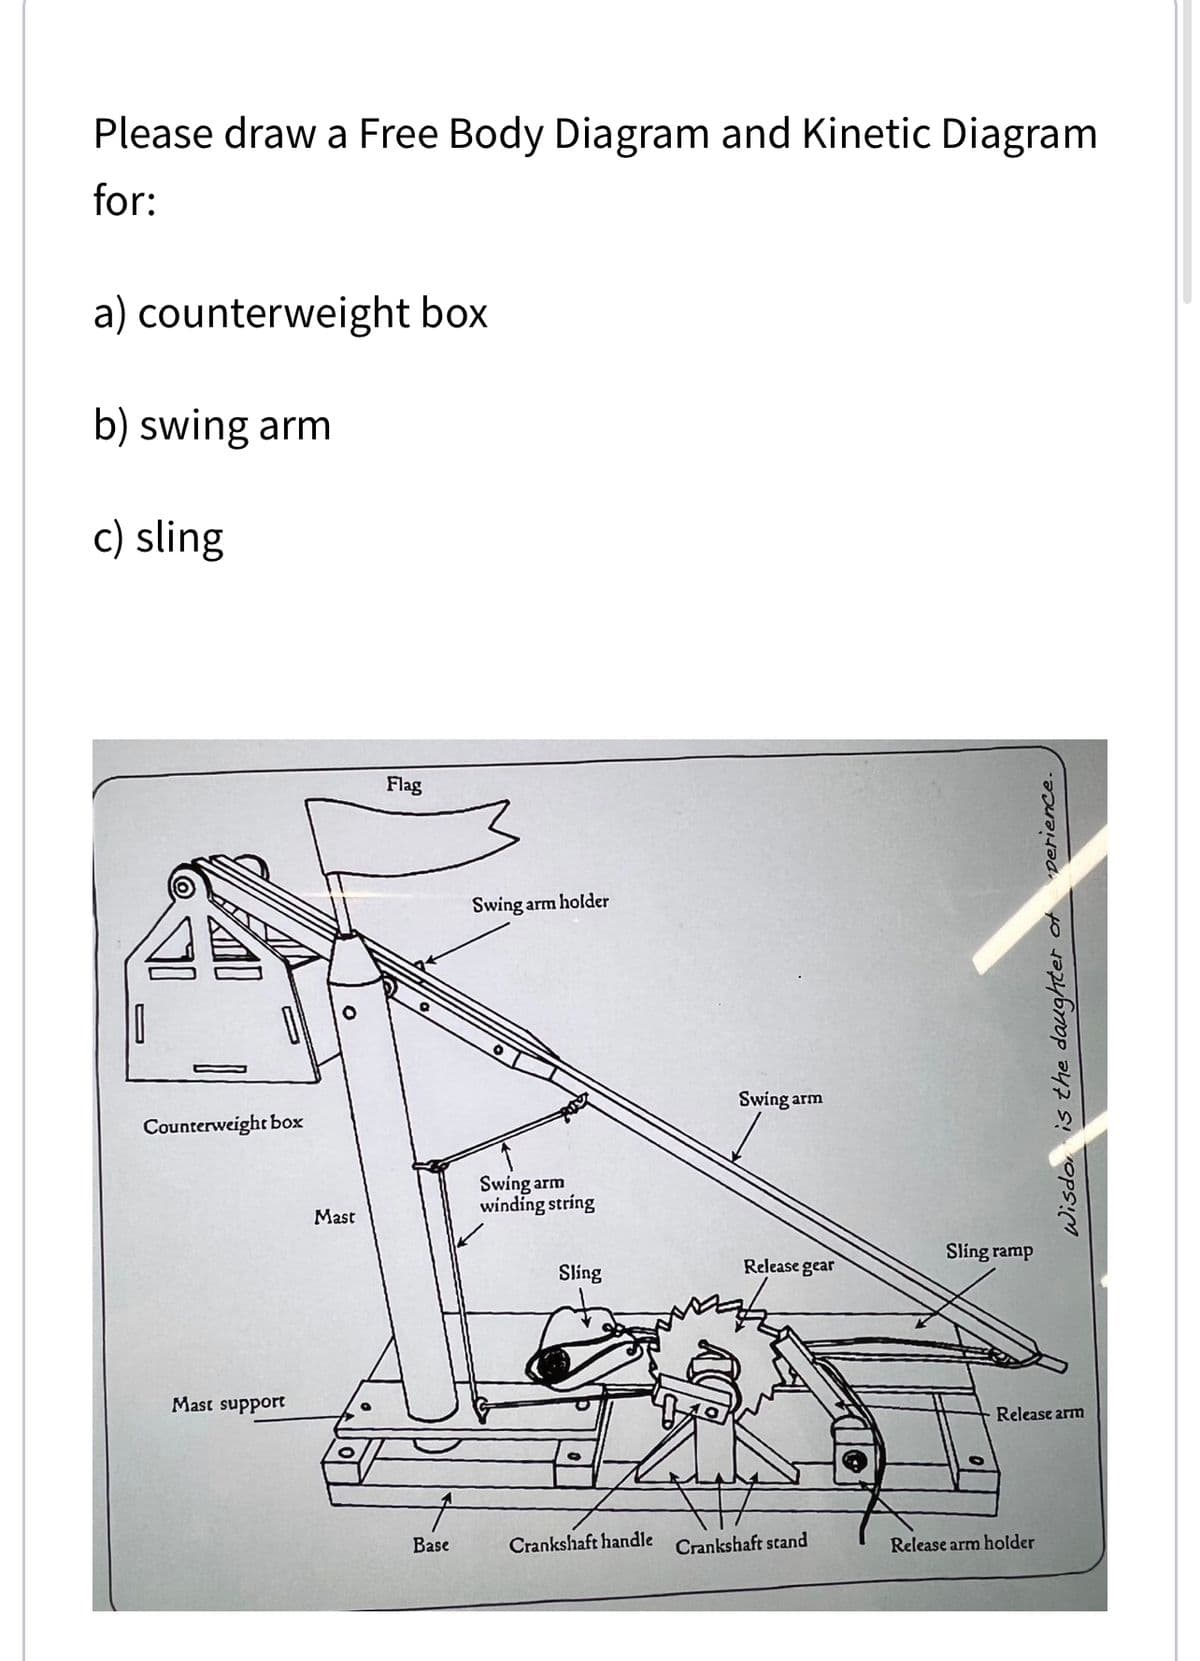 Please draw a Free Body Diagram and Kinetic Diagram
for:
a) counterweight box
b) swing arm
c) sling
Counterweight box
Mast support
Mast
Flag
O
Base
Swing arm holder
Swing arm
winding string
Sling
Crankshaft handle
Swing arm
Release gear
Crankshaft stand
Wisdo is the daughter of perience.
Sling ramp
Release arm
Release arm holder